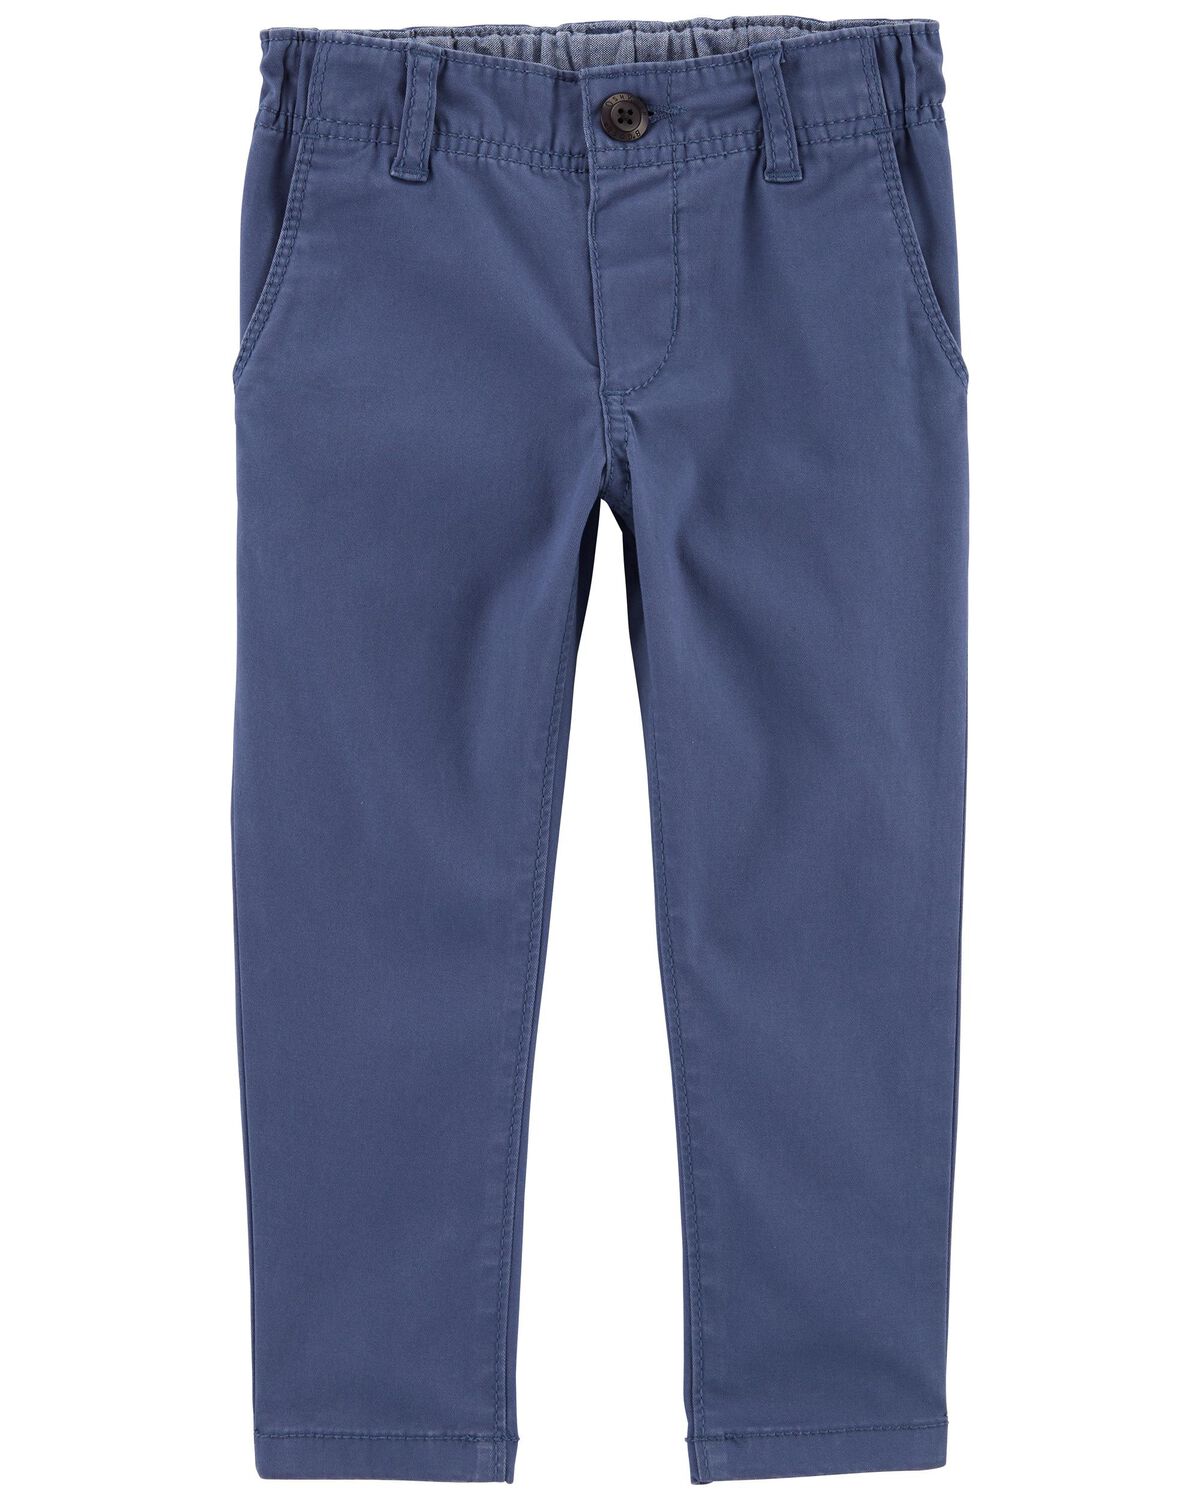 Toddler Skinny Fit Tapered Chino Pants